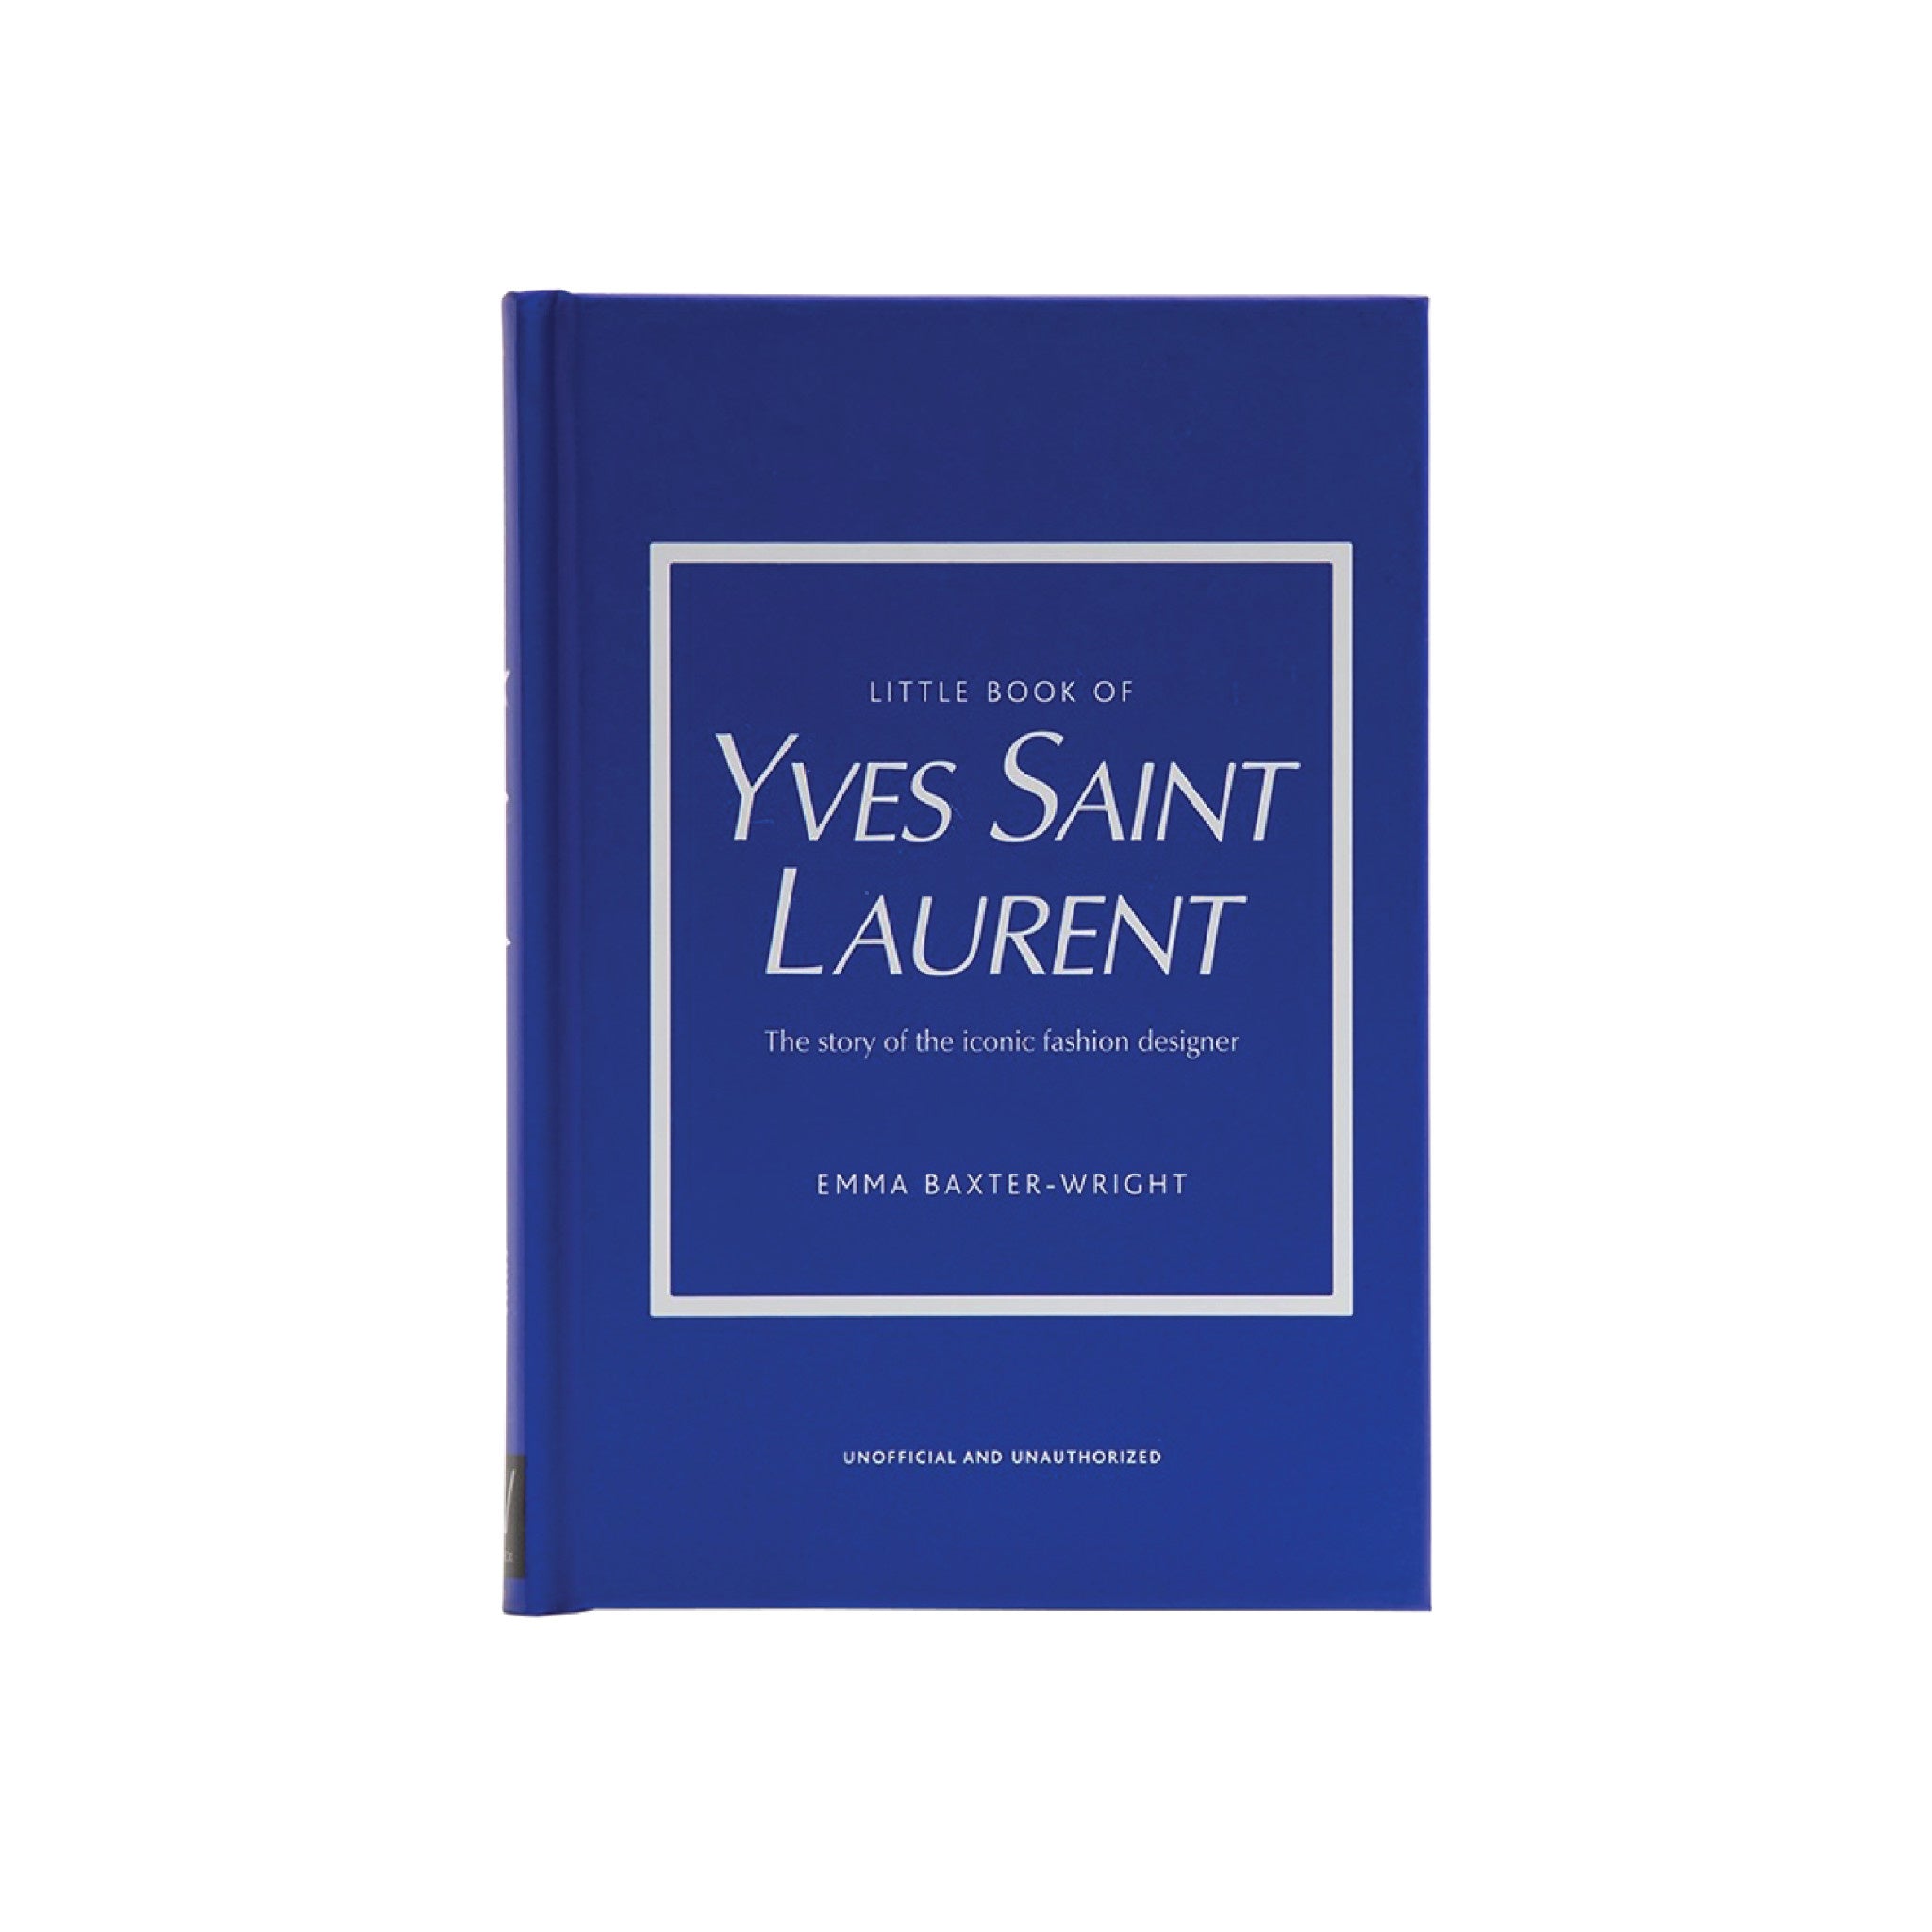 Little Book of Yves Saint Laurent: The Story of the Iconic Fashion House - Wynwood Walls Shop